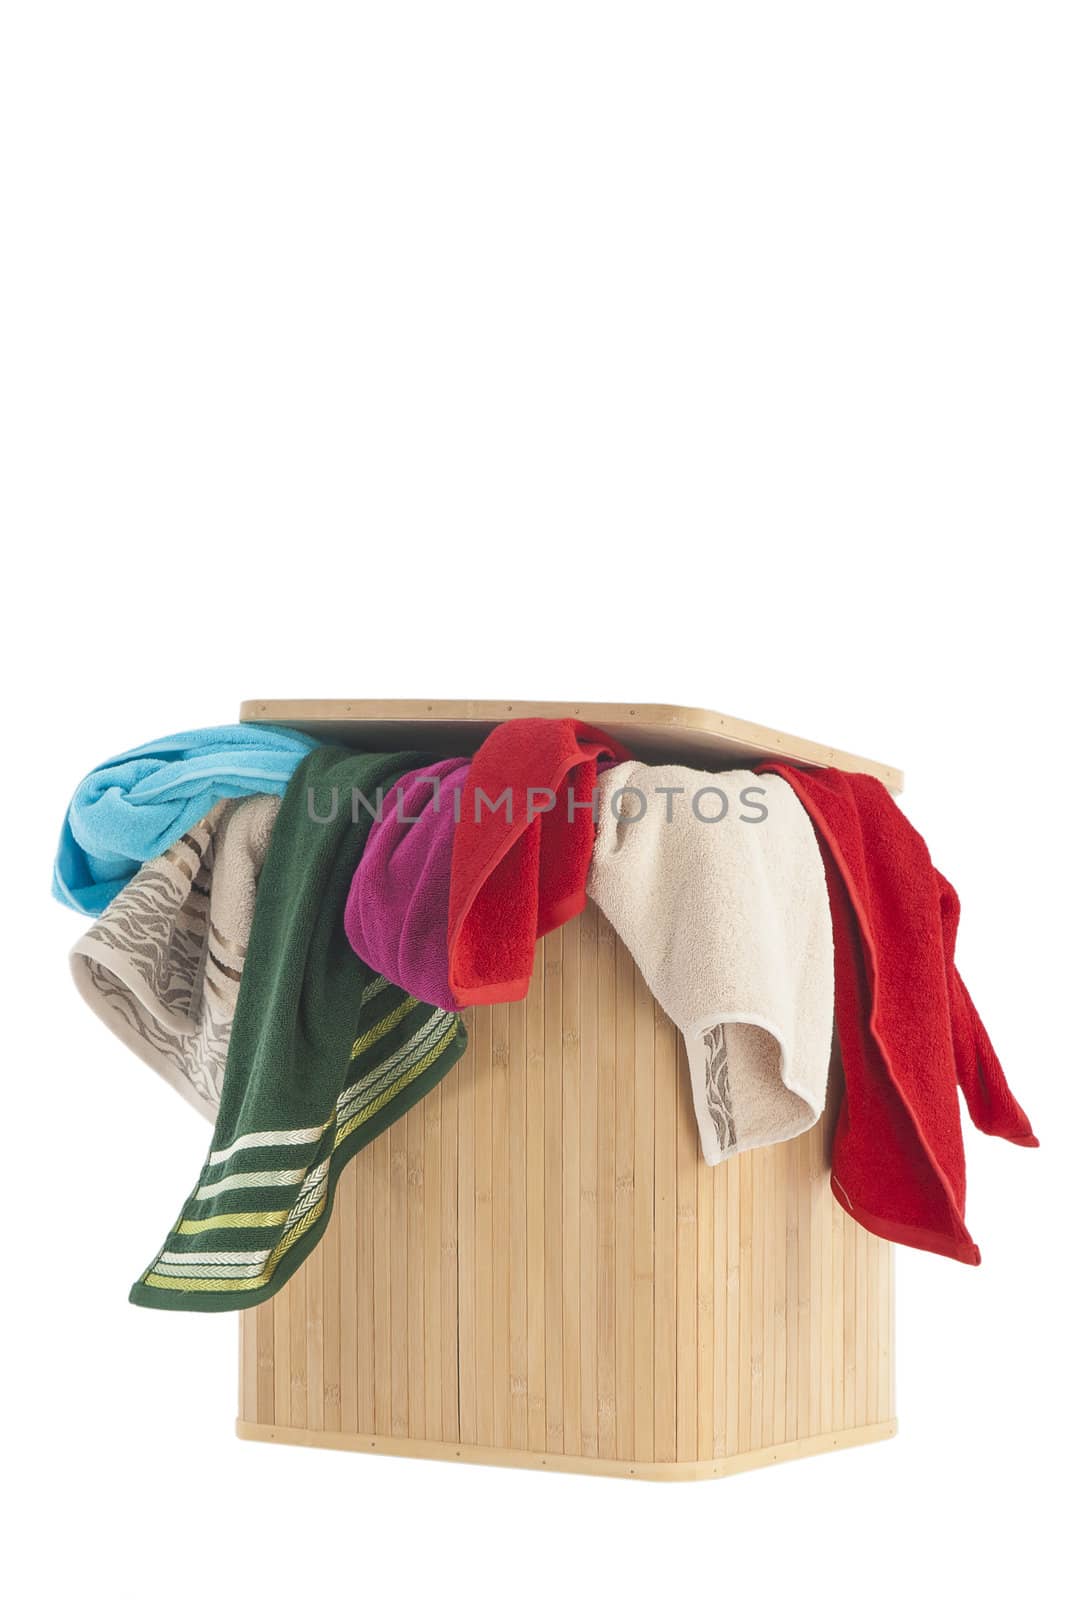 Laundry Basket and towels by VictorO